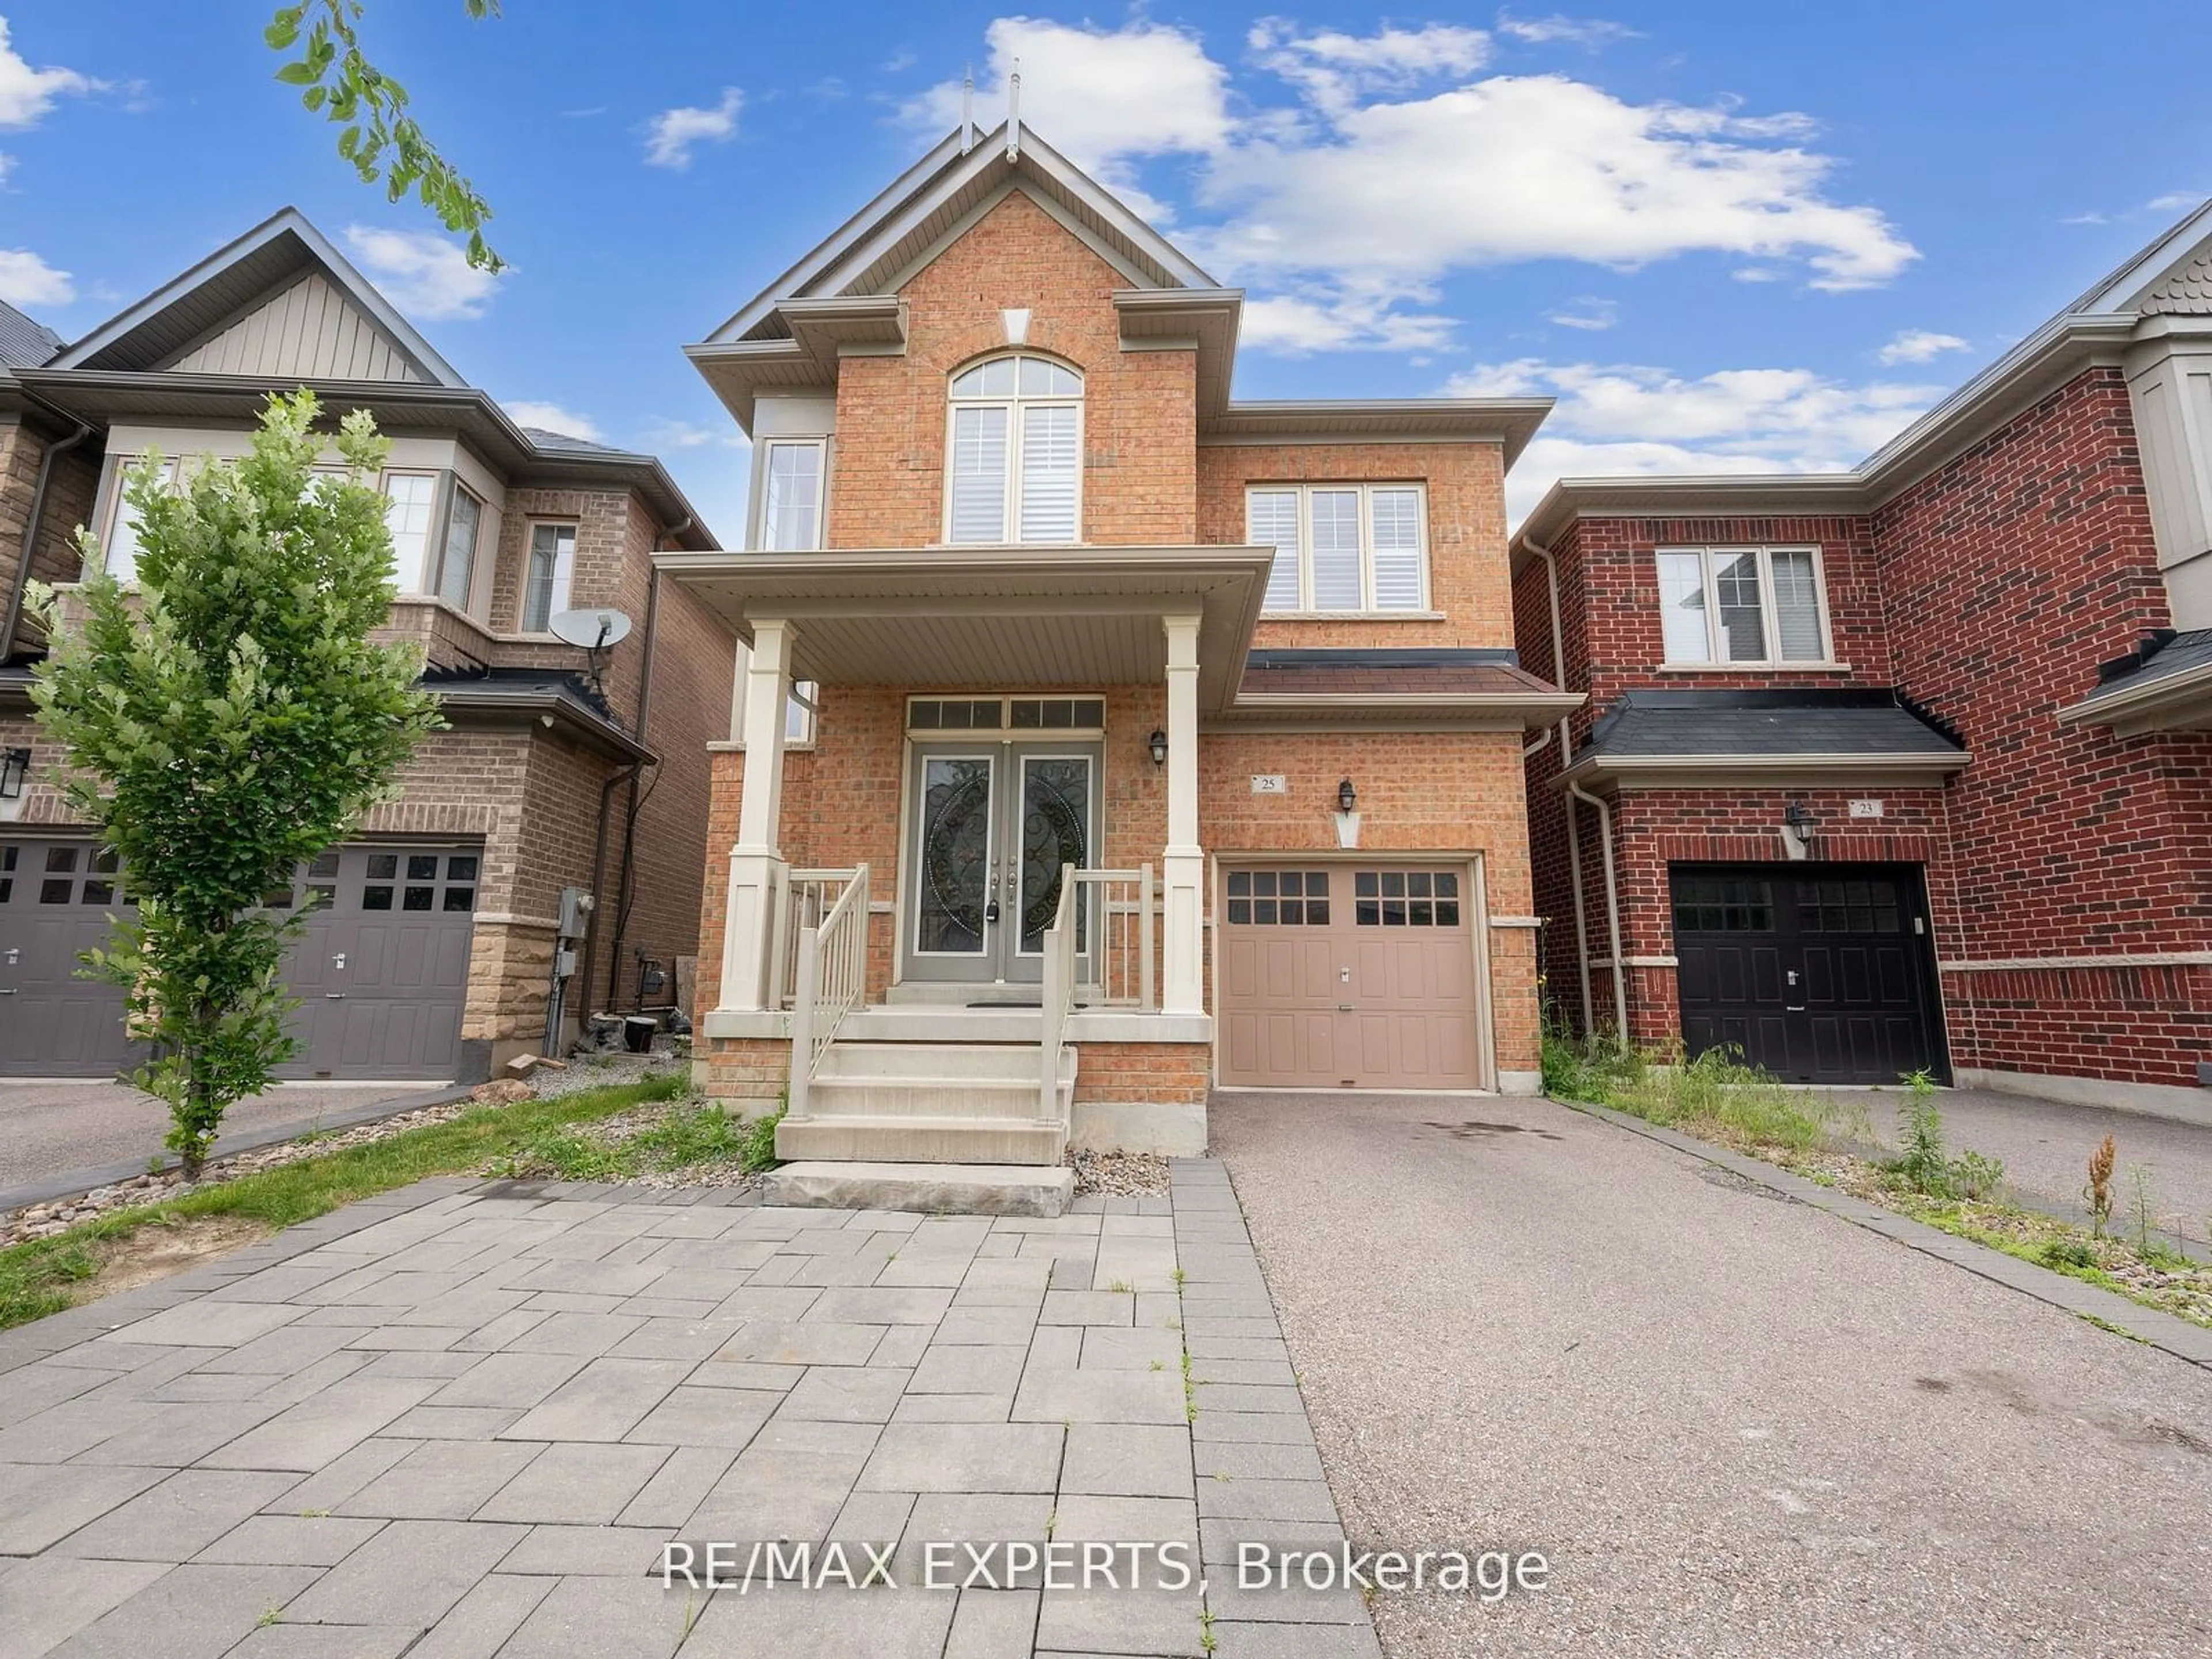 Home with brick exterior material for 25 Killington Ave, Vaughan Ontario L4H 3Y5